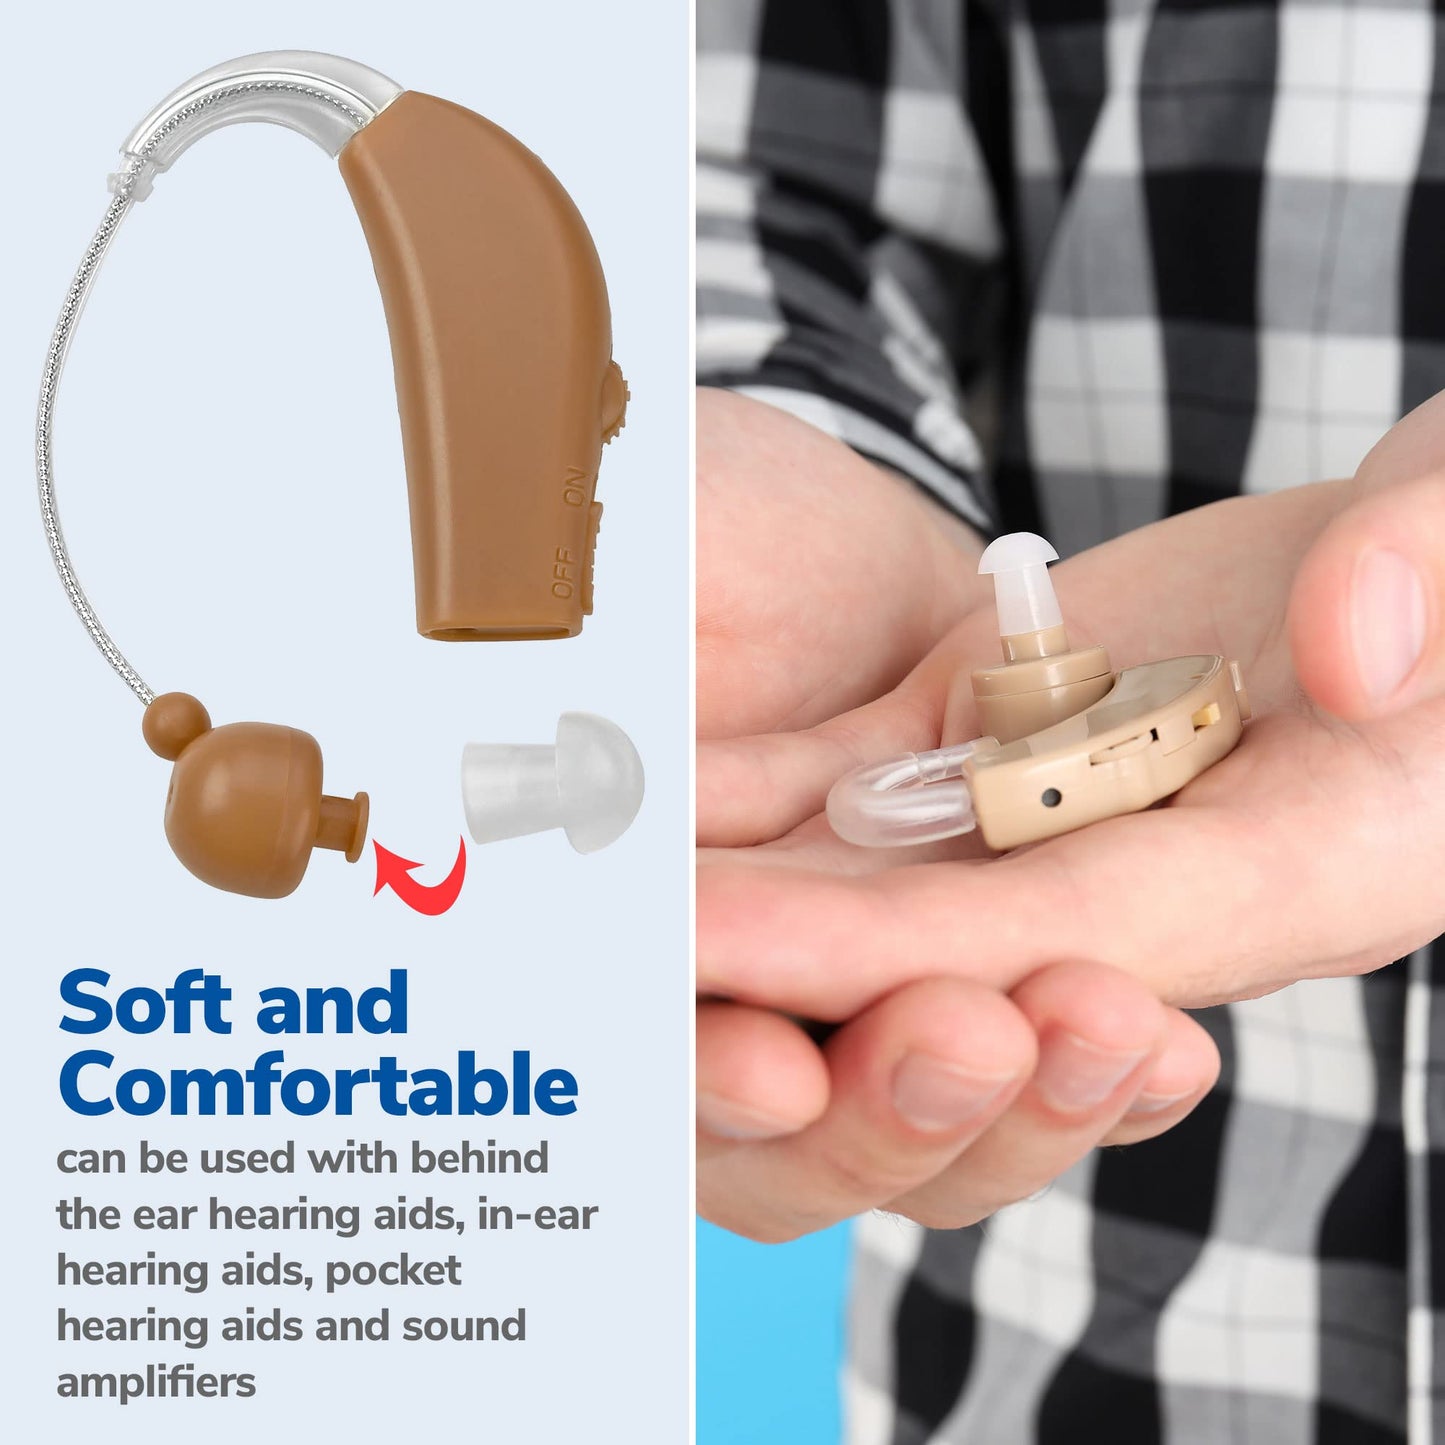 NewEar Hearing Aid Domes - Universal Domes for Hearing Aids - Sizes Small, Medium, Large & X-Large Earbud Replacements and BTE Hearing Sound Amplifiers